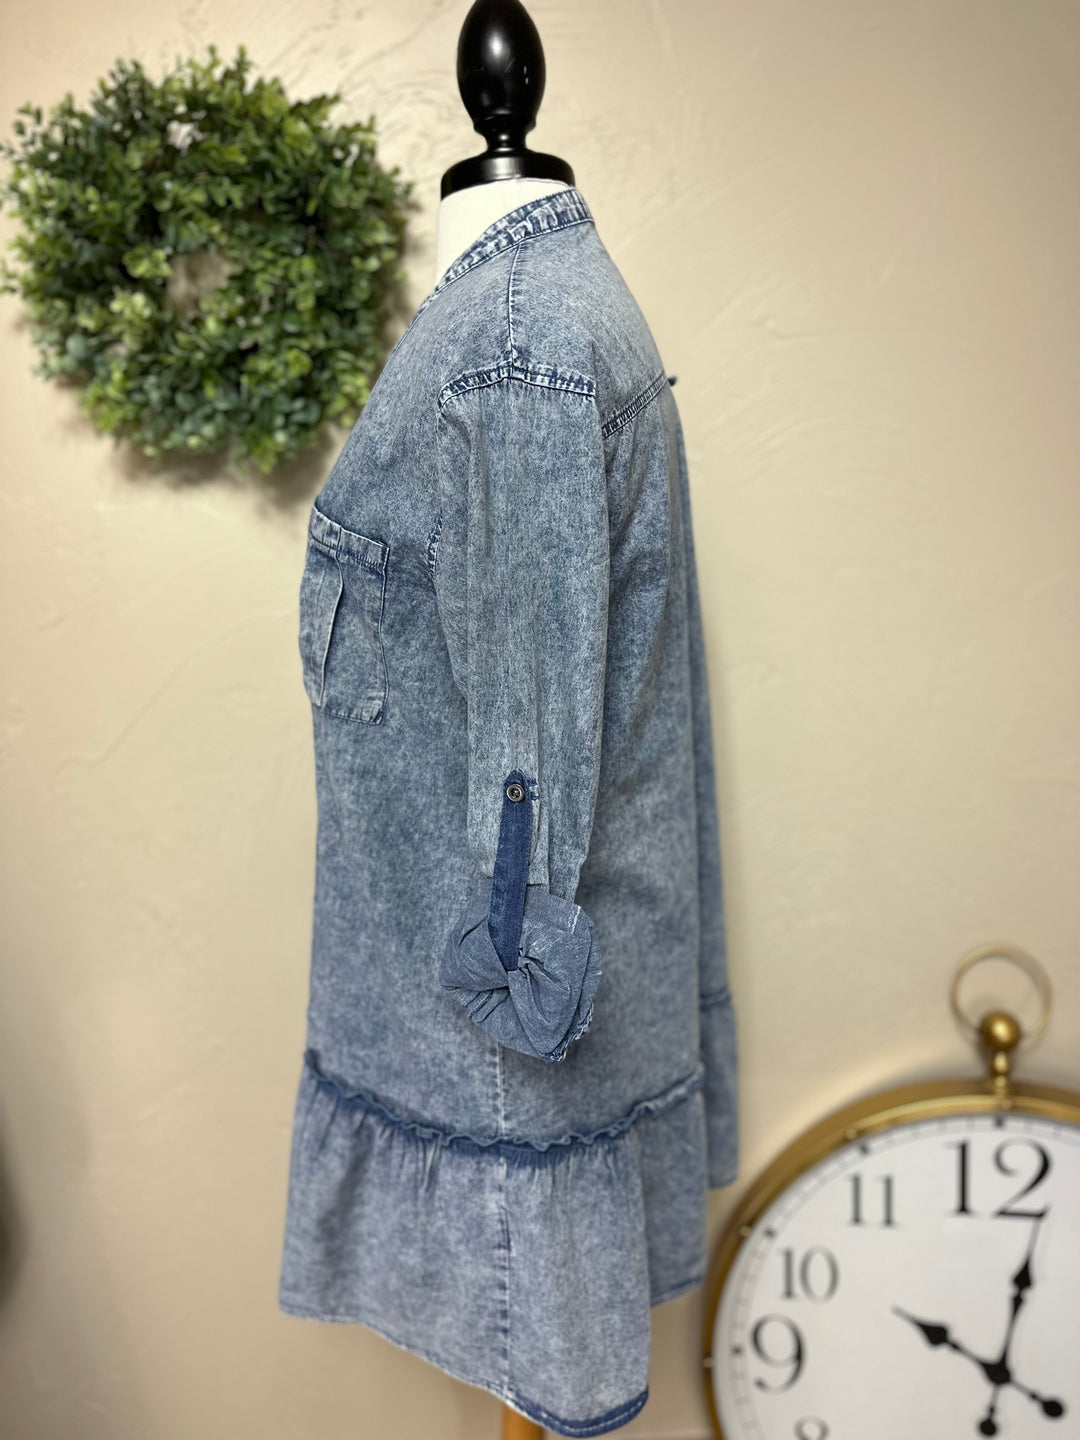 Liza's Chambray Blue Wash Button Up Top